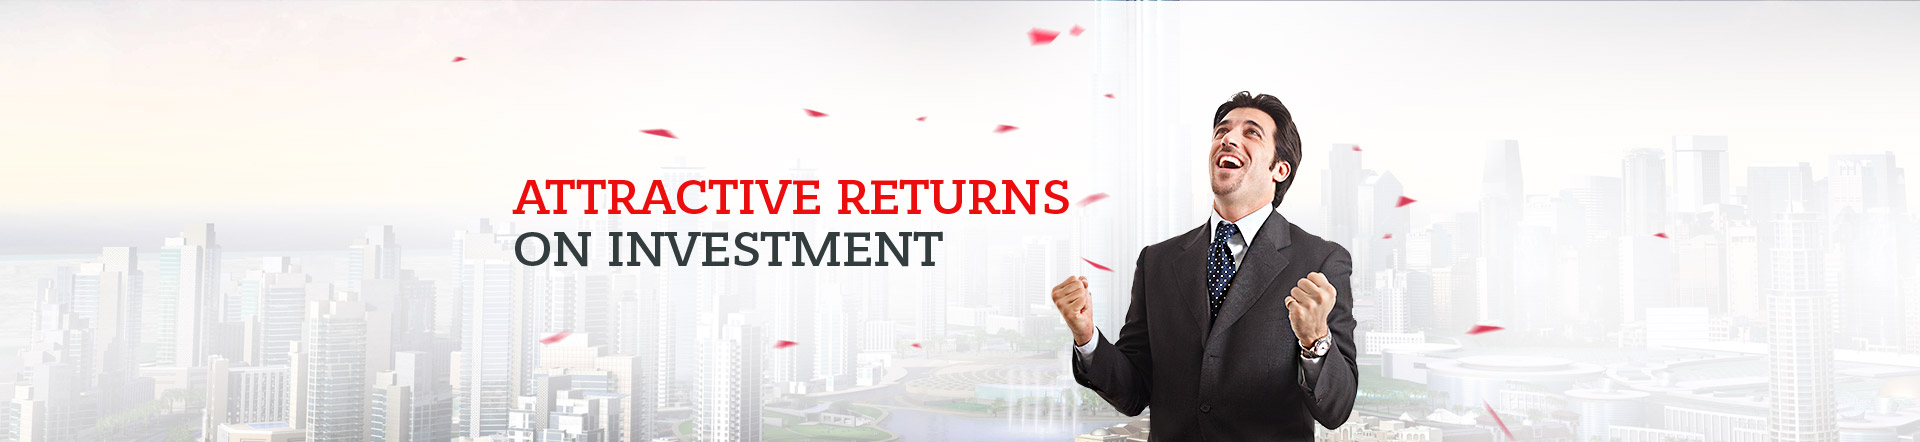 Attractive returns on investment